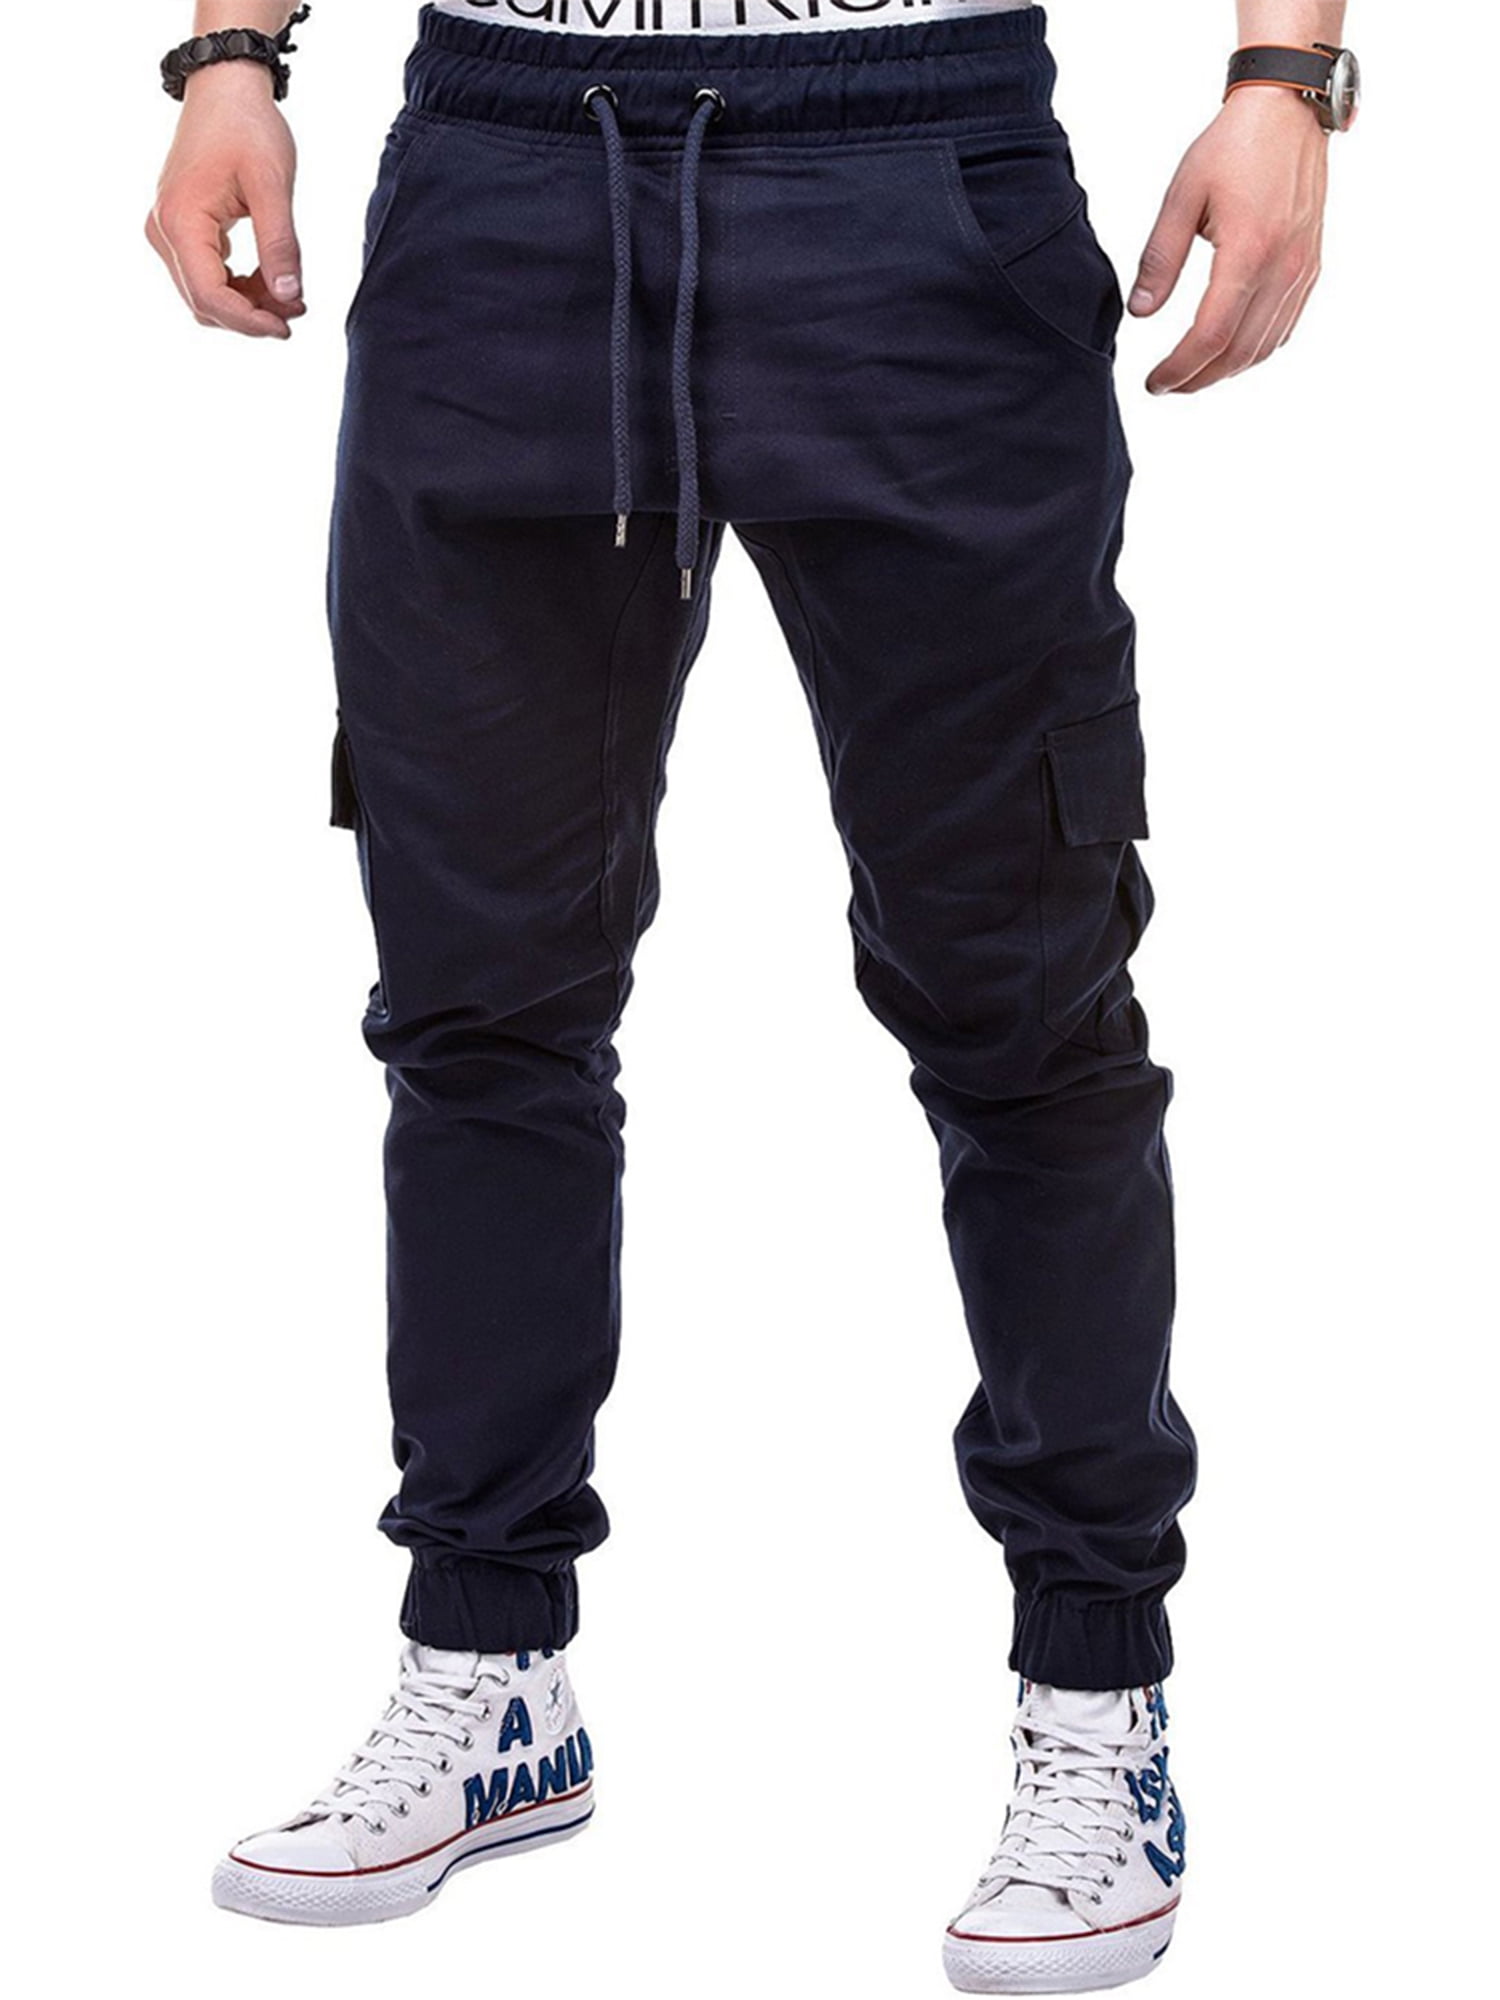 Details about   NEW Training Pants Joggers Mens for Fitness Gym Casual Streetwear show original title 